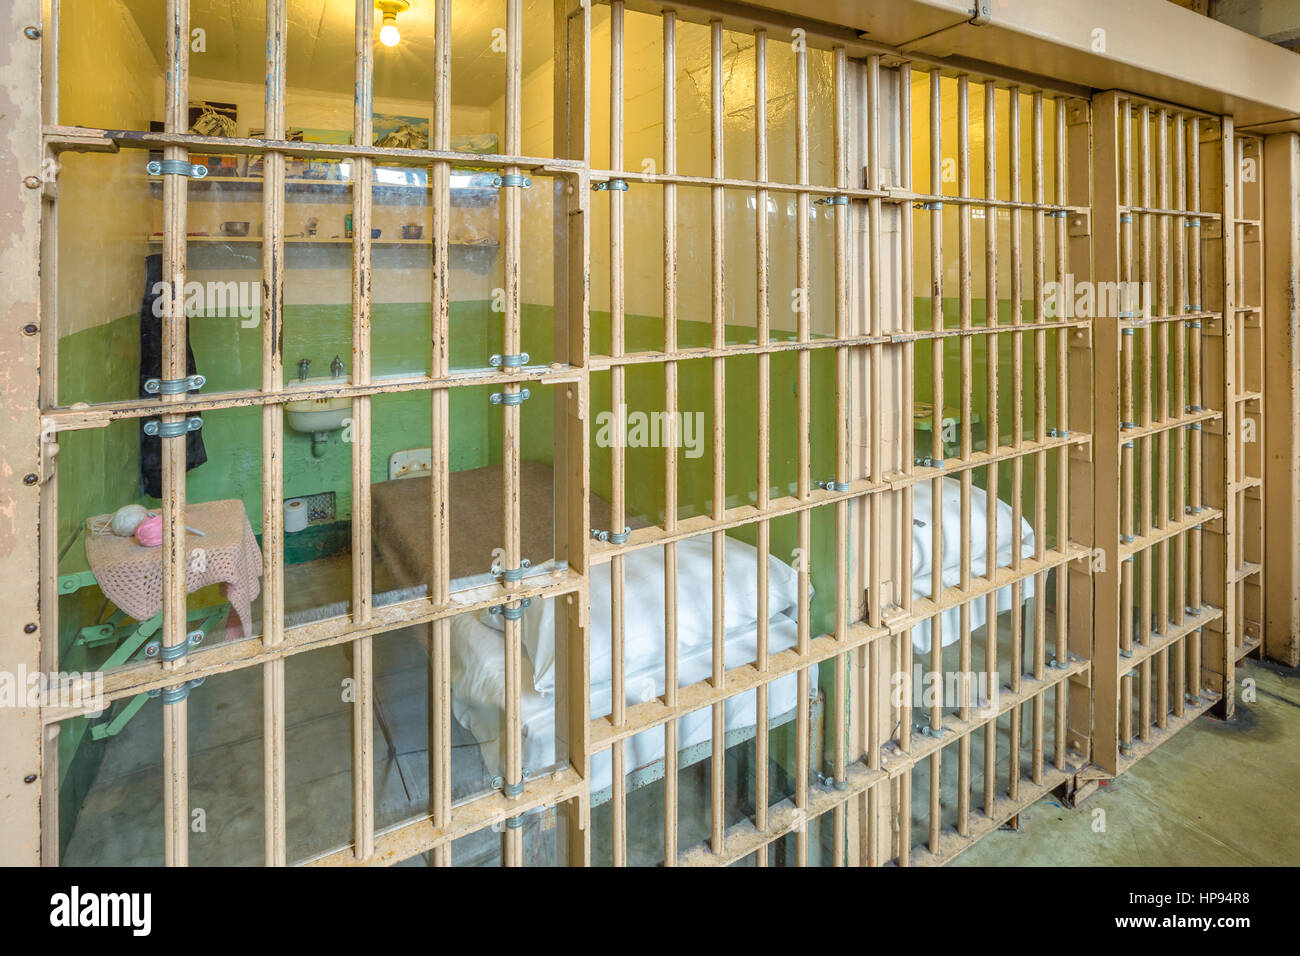 San Francisco, California, United States - August 14, 2016: Alcatraz prison main room with three rows of cells on three levels. Many tourists visiting Stock Photo